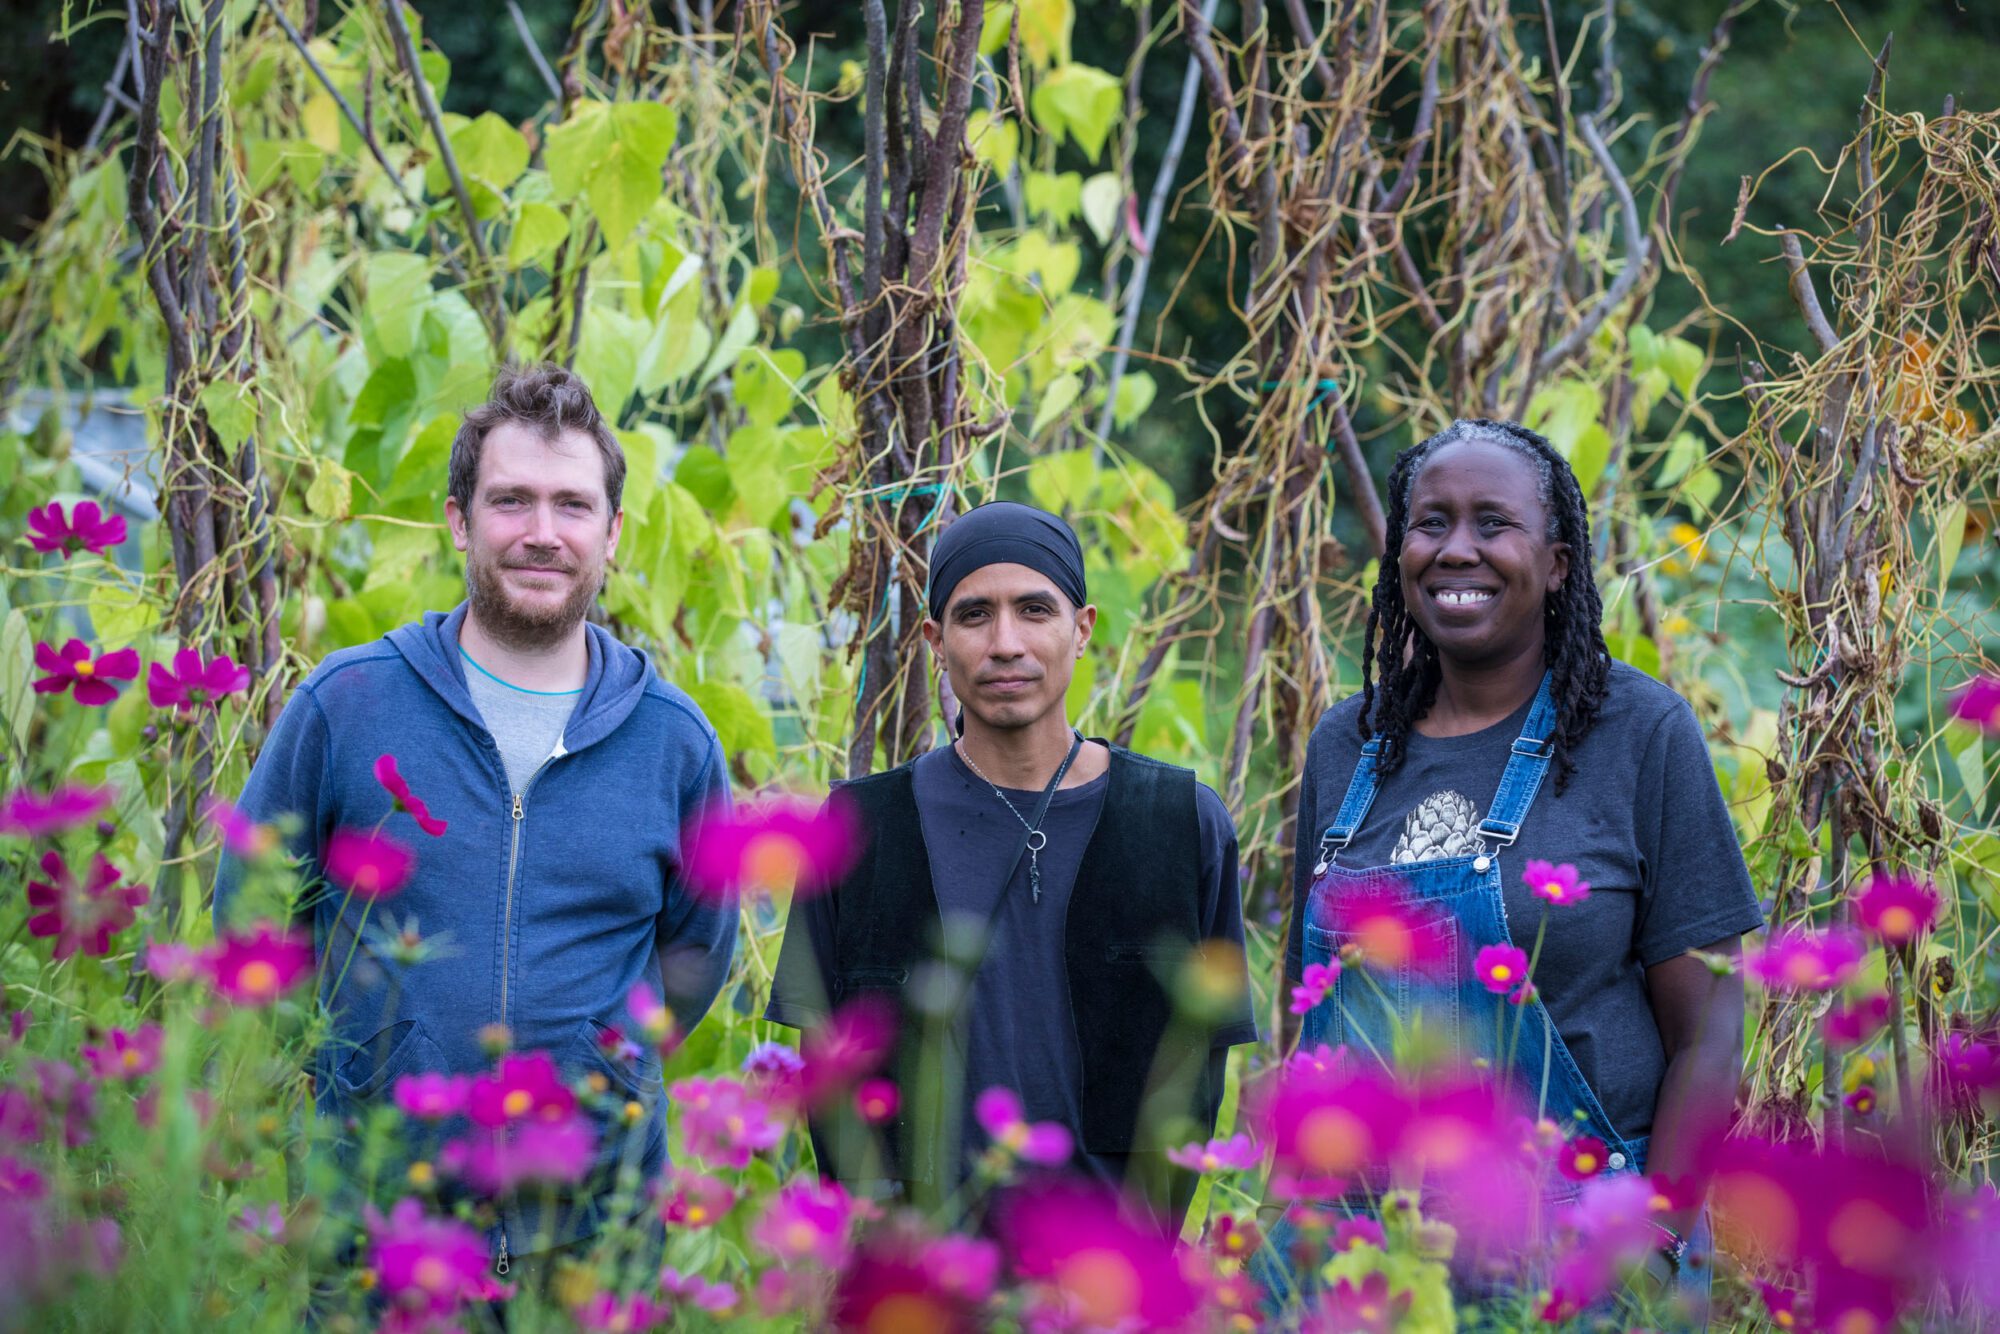 Three people – a white man, a brown man and a Black woman smiling – stand against a lush green plant background and bright pink flowers in the foreground.